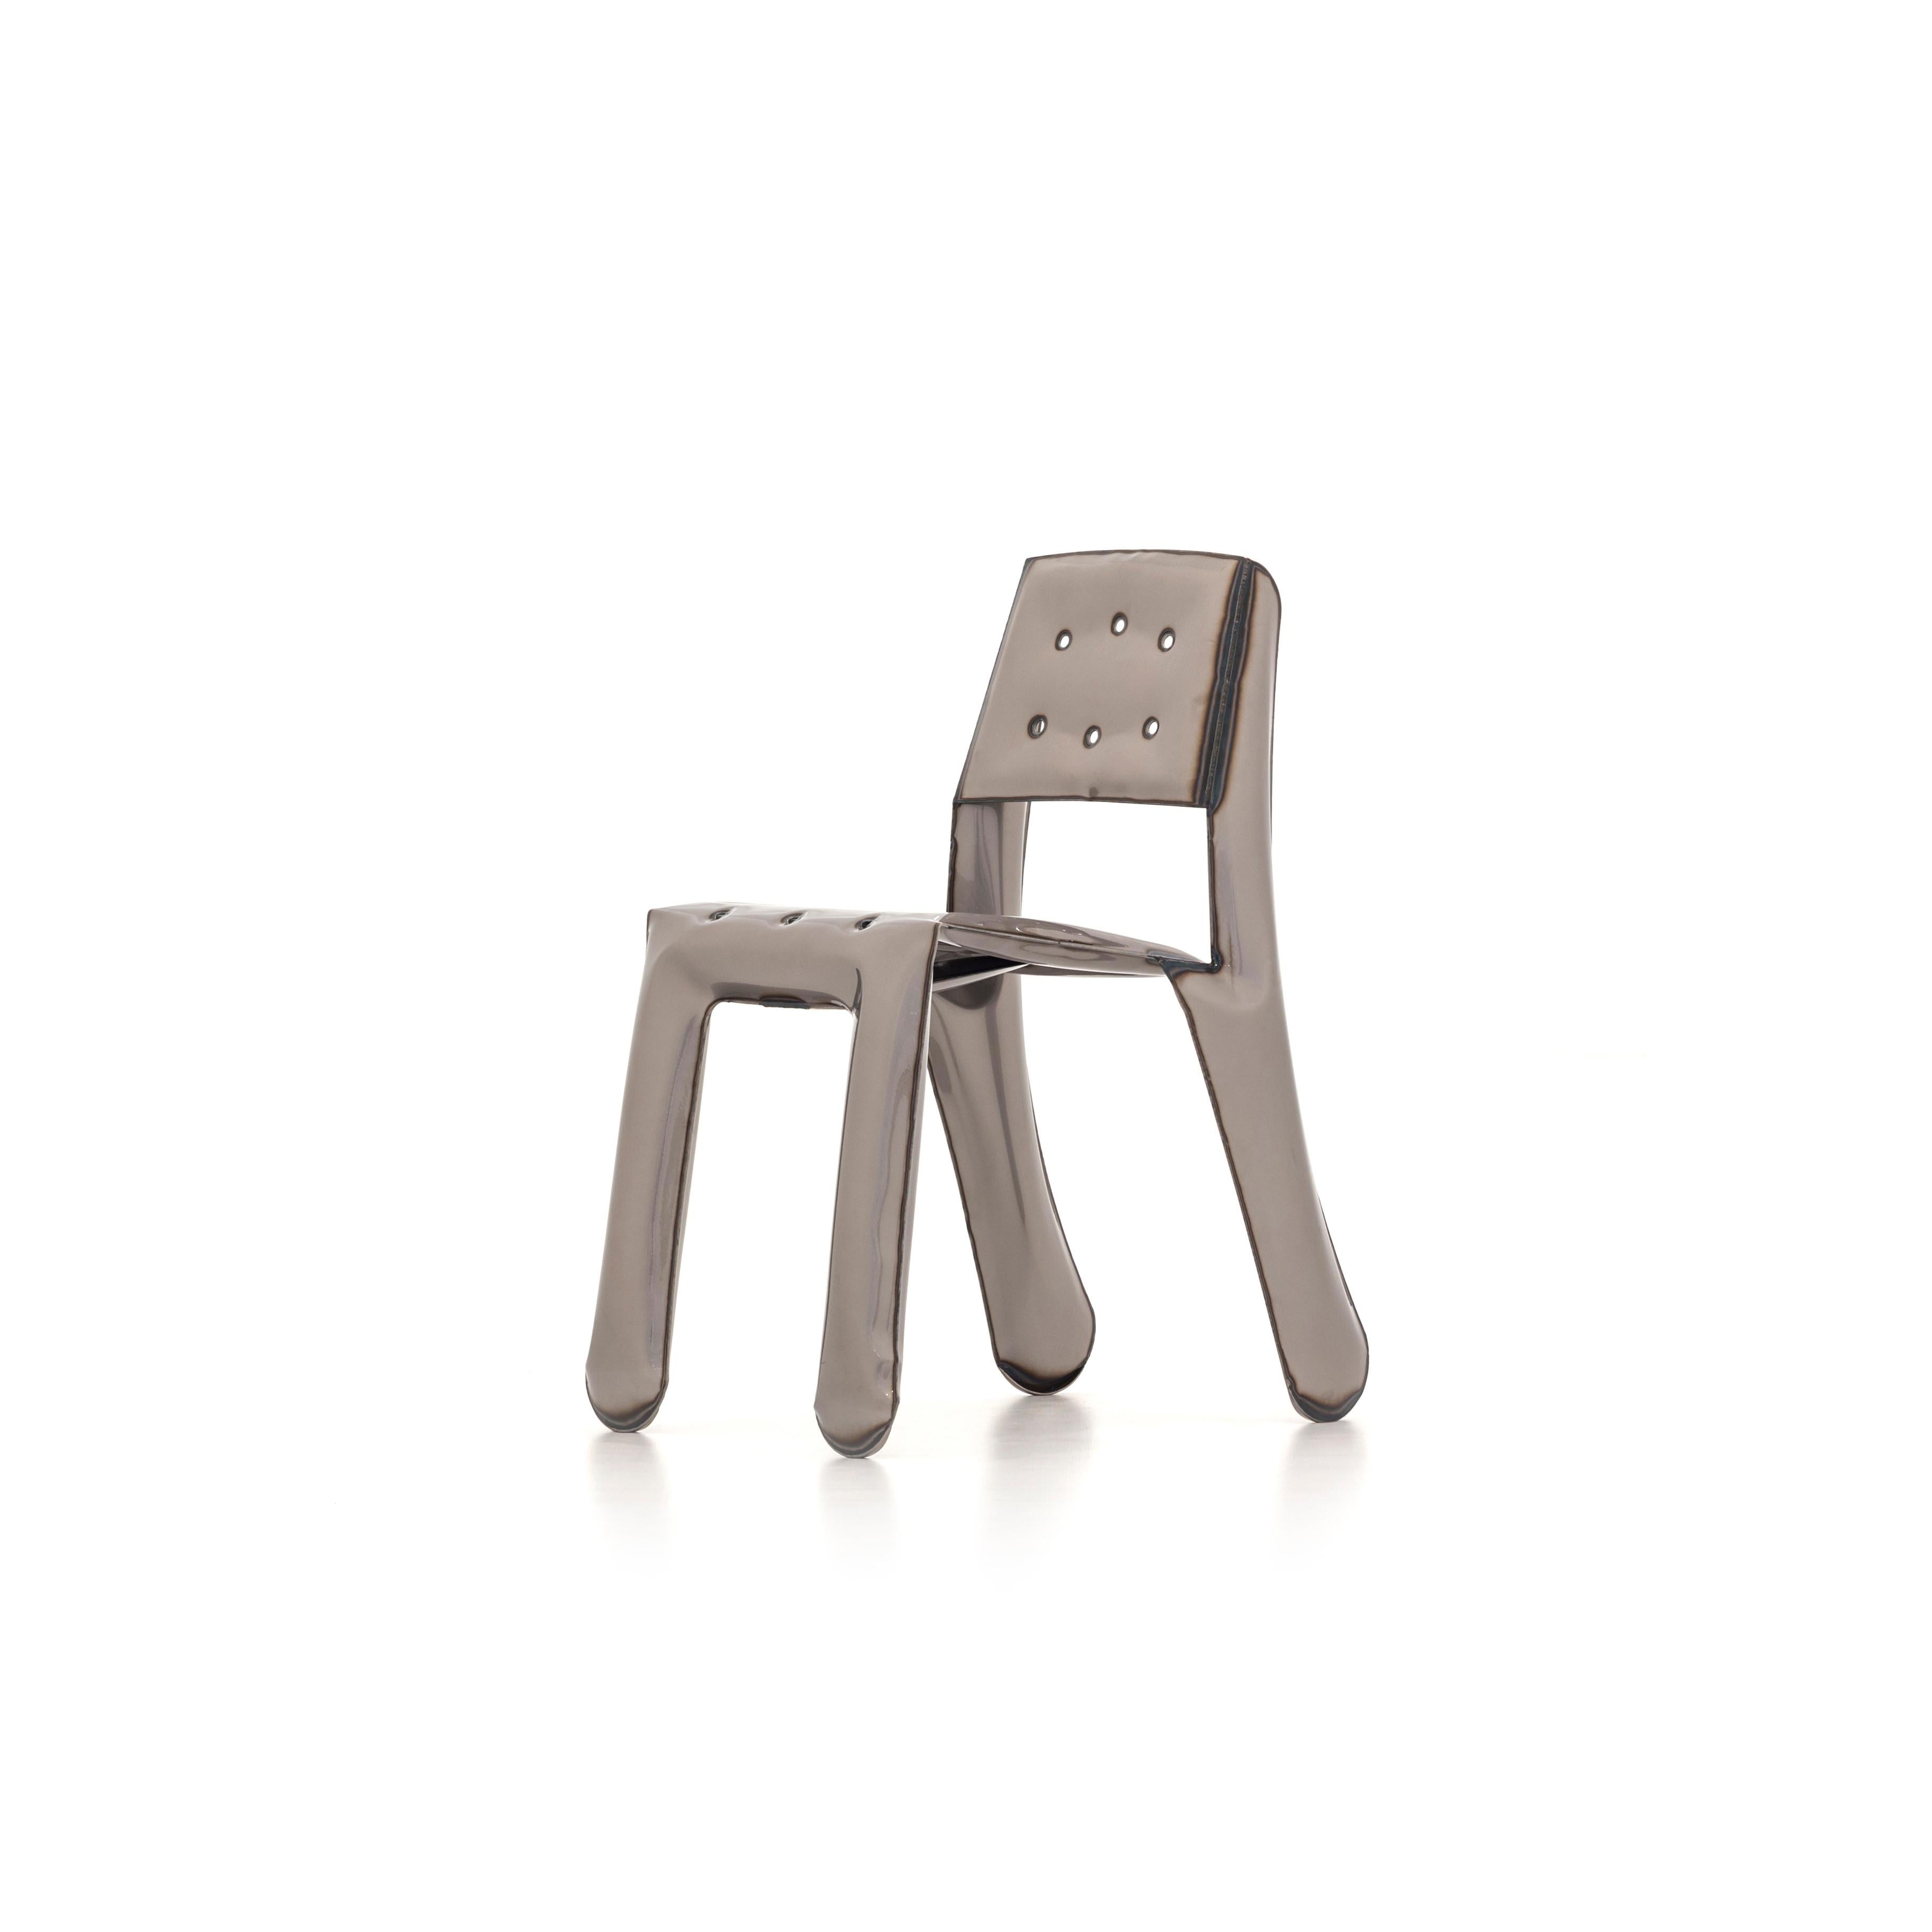 A development of the limited edition Chippensteel chair available in new colors. It still offers a unique material experience but the shape of the chair has been slightly redesigned to allow a mass production.

The chair has been uniquely